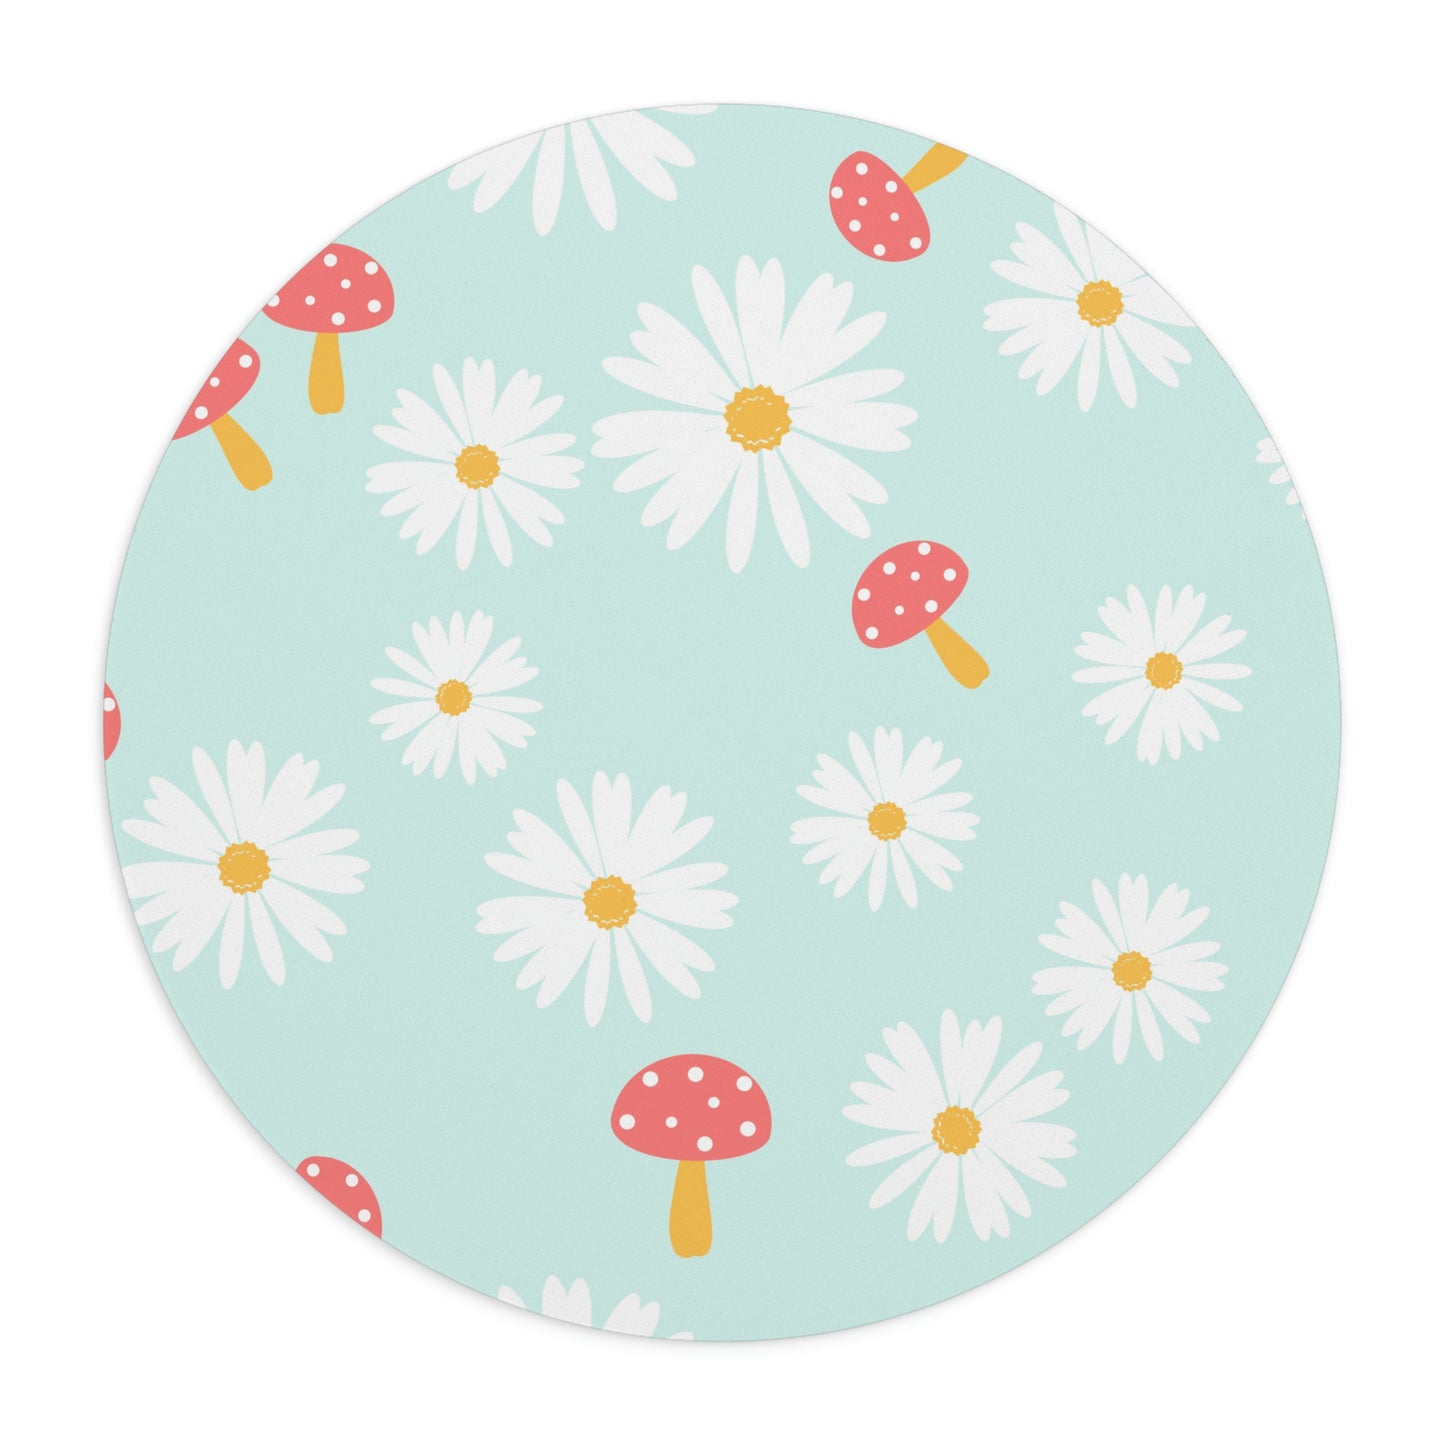 Daisies and Mushrooms Mouse Pad